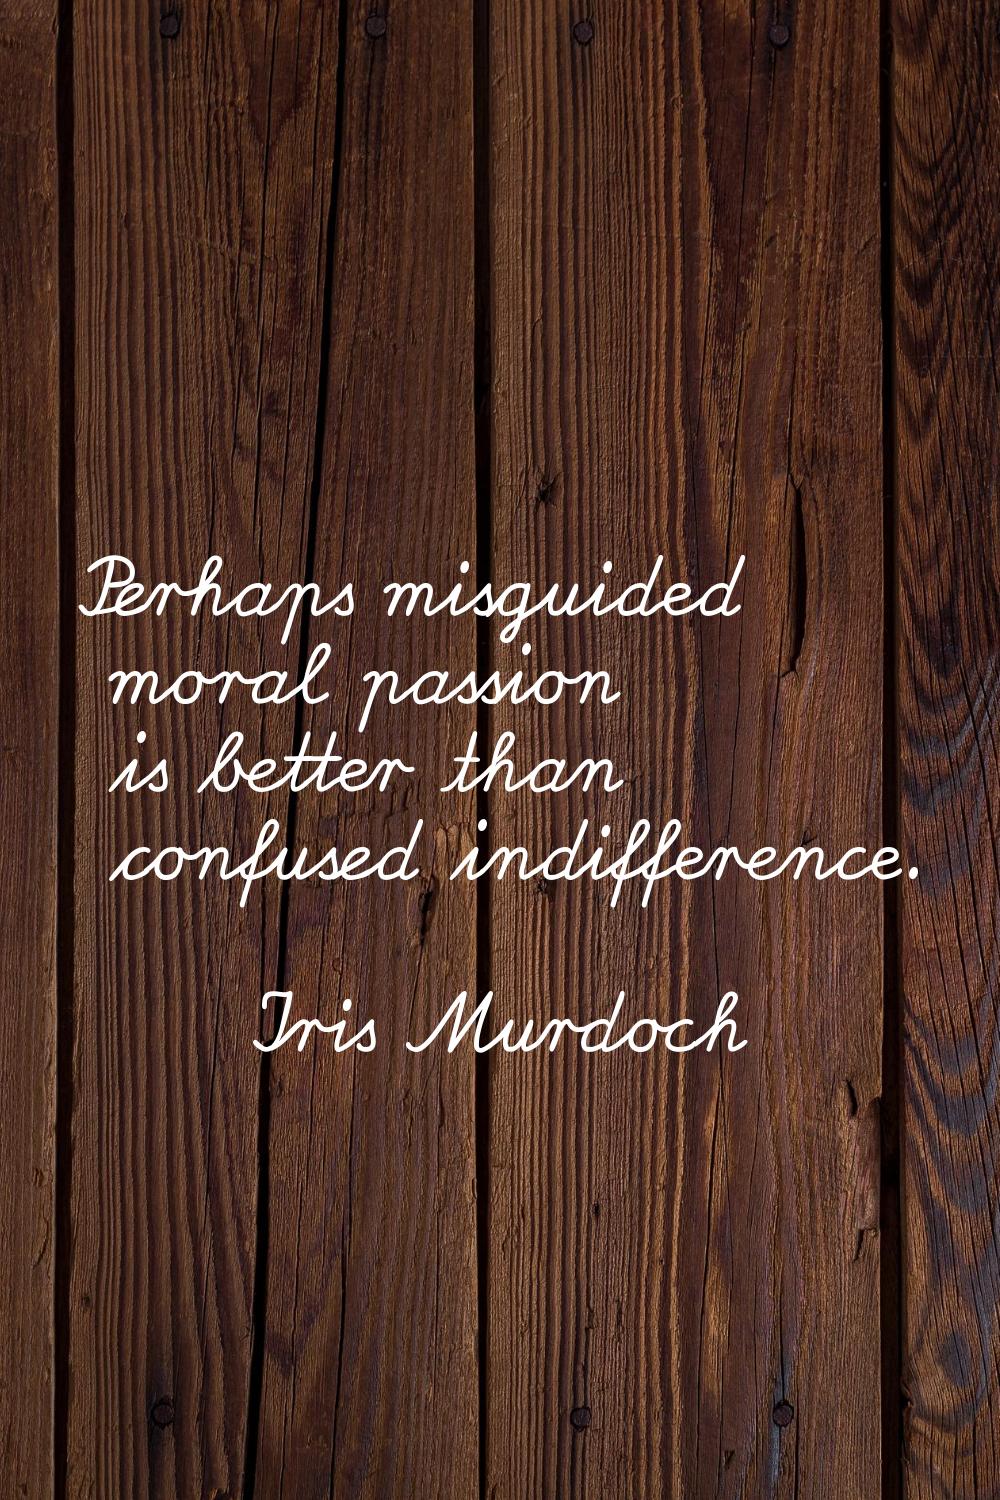 Perhaps misguided moral passion is better than confused indifference.